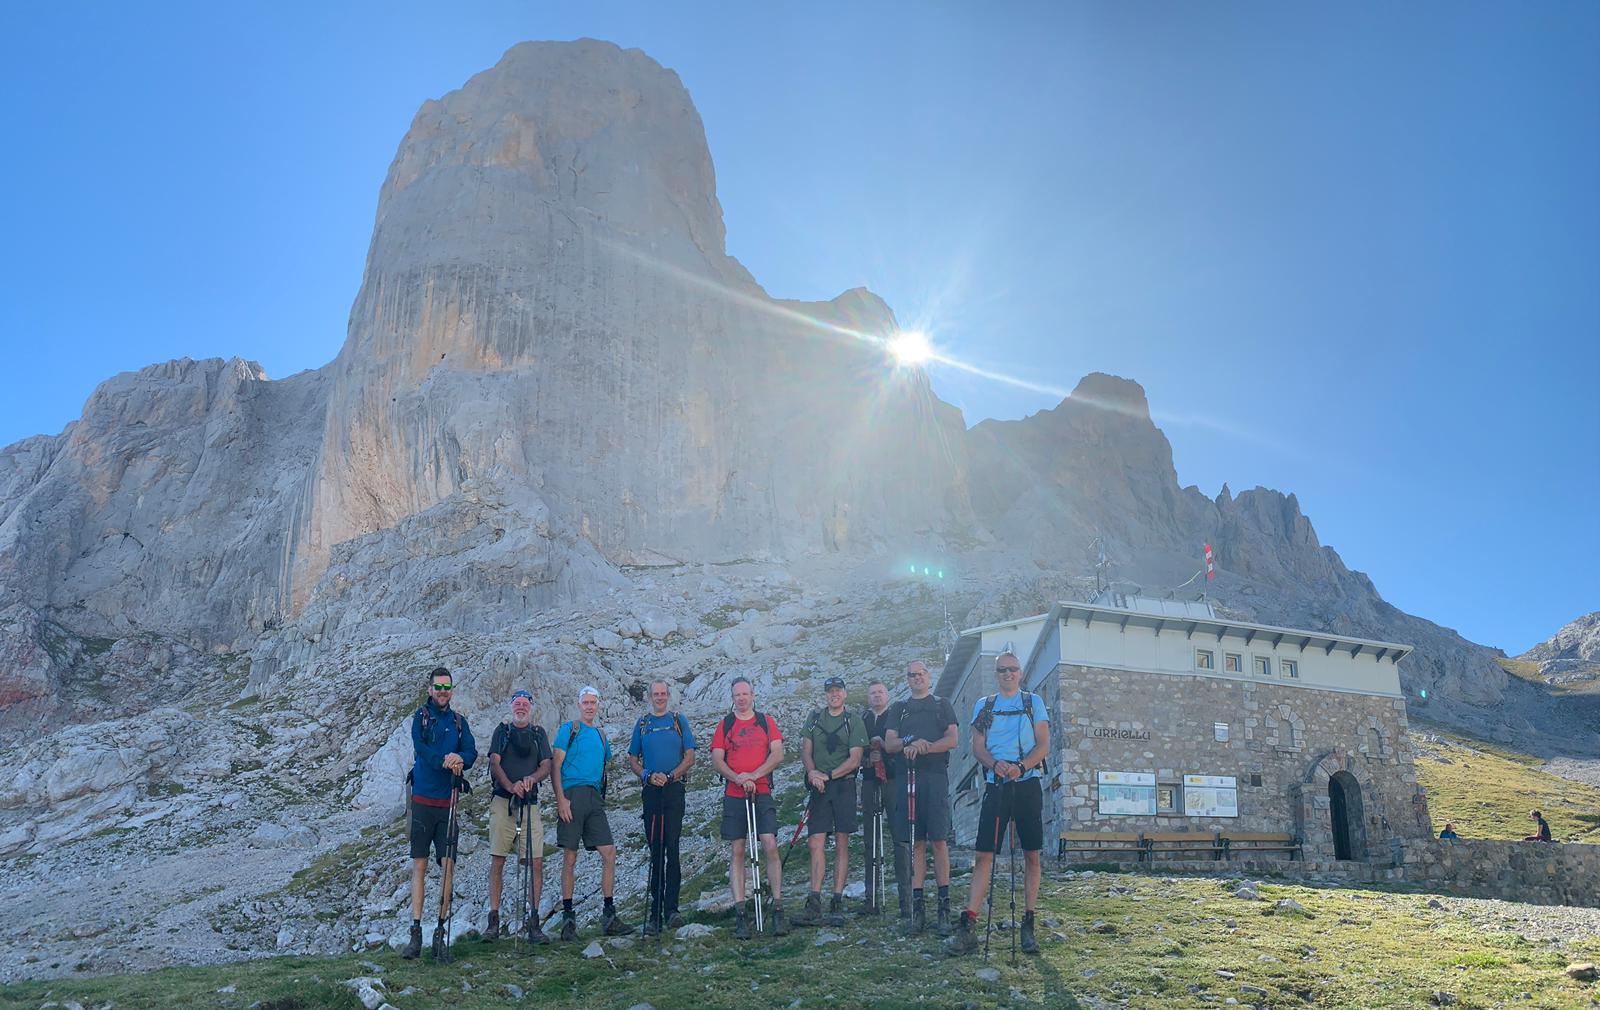 Picos de Europa, 5 Day Trip with "The Plodders" October 2019